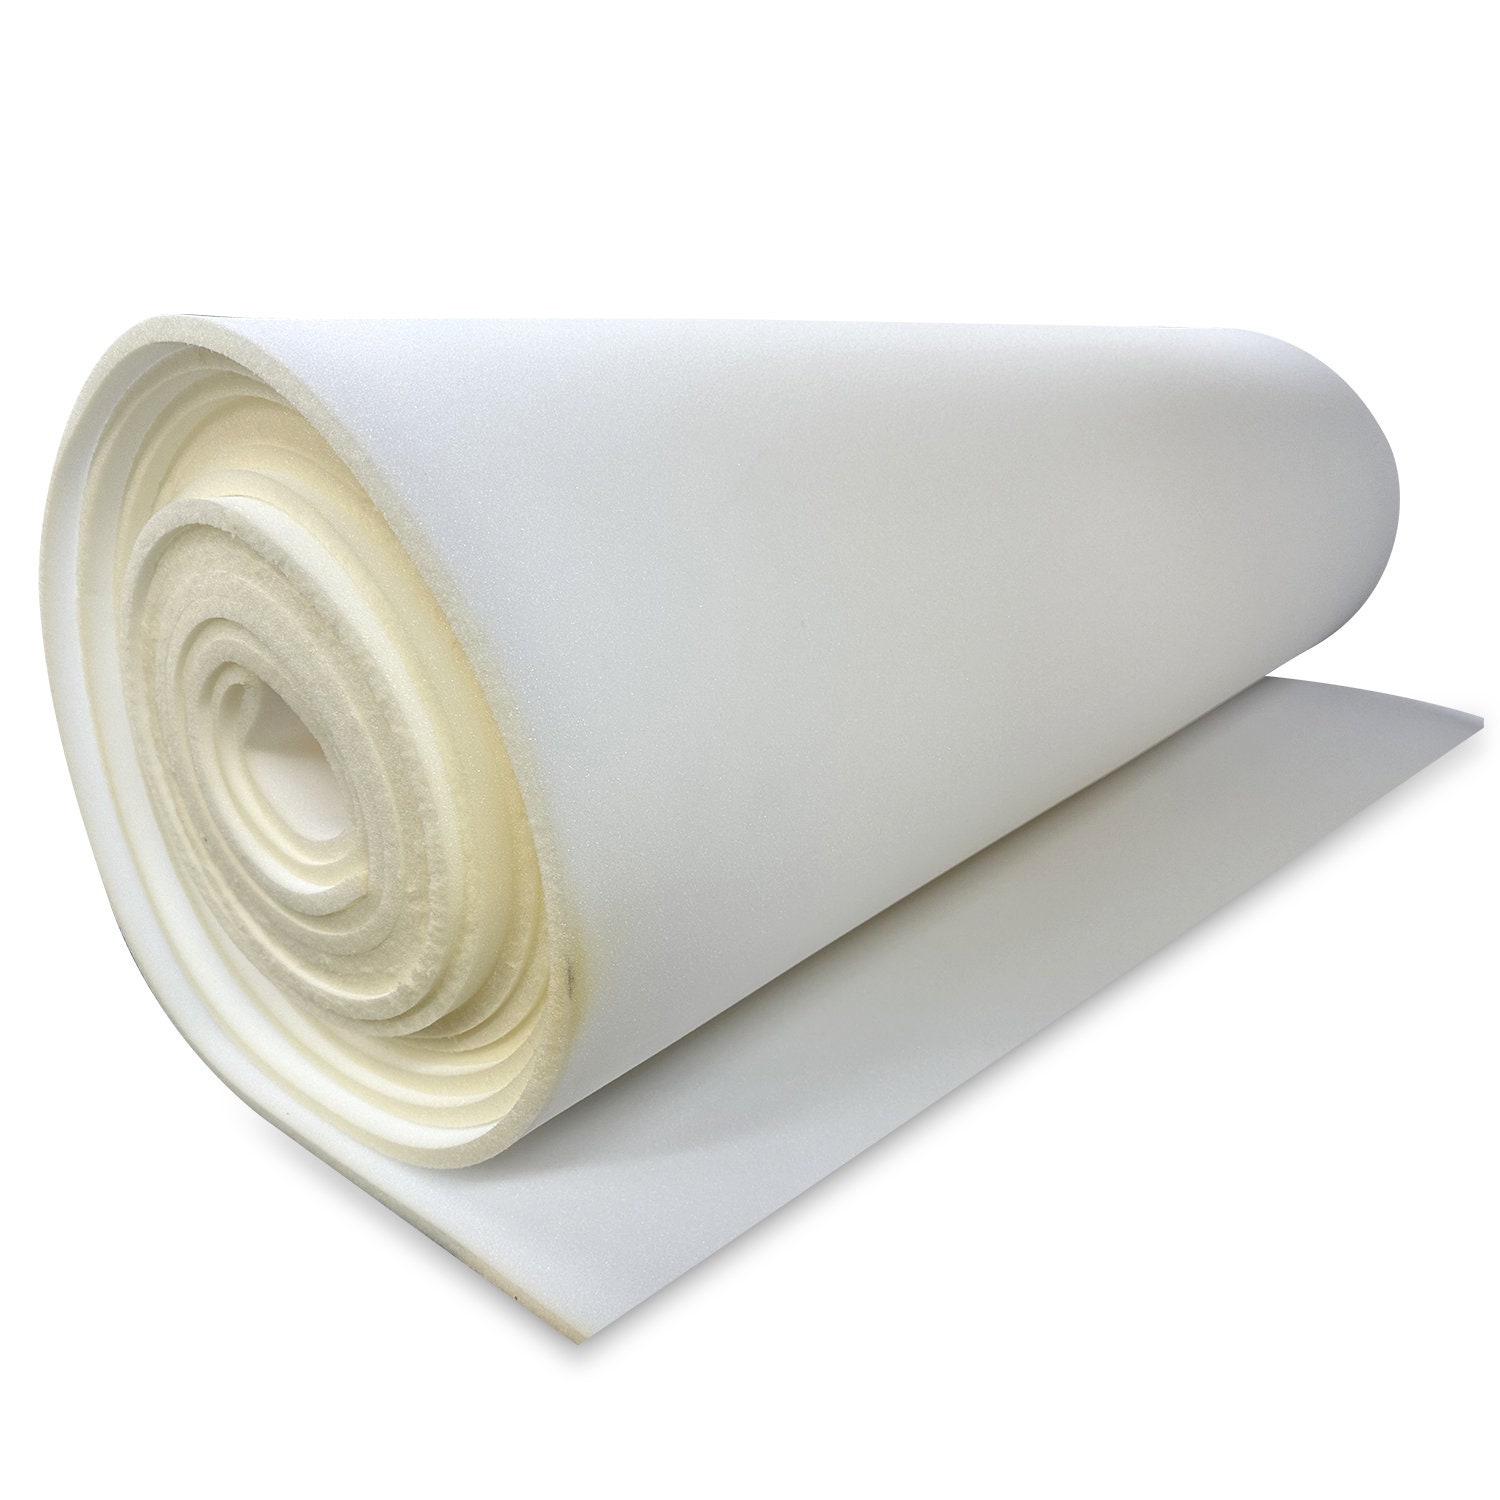 AK TRADING CO. Professional 4 Thick, 18 Wide X 72 Long Regular Density Upholstery  Foam, White 